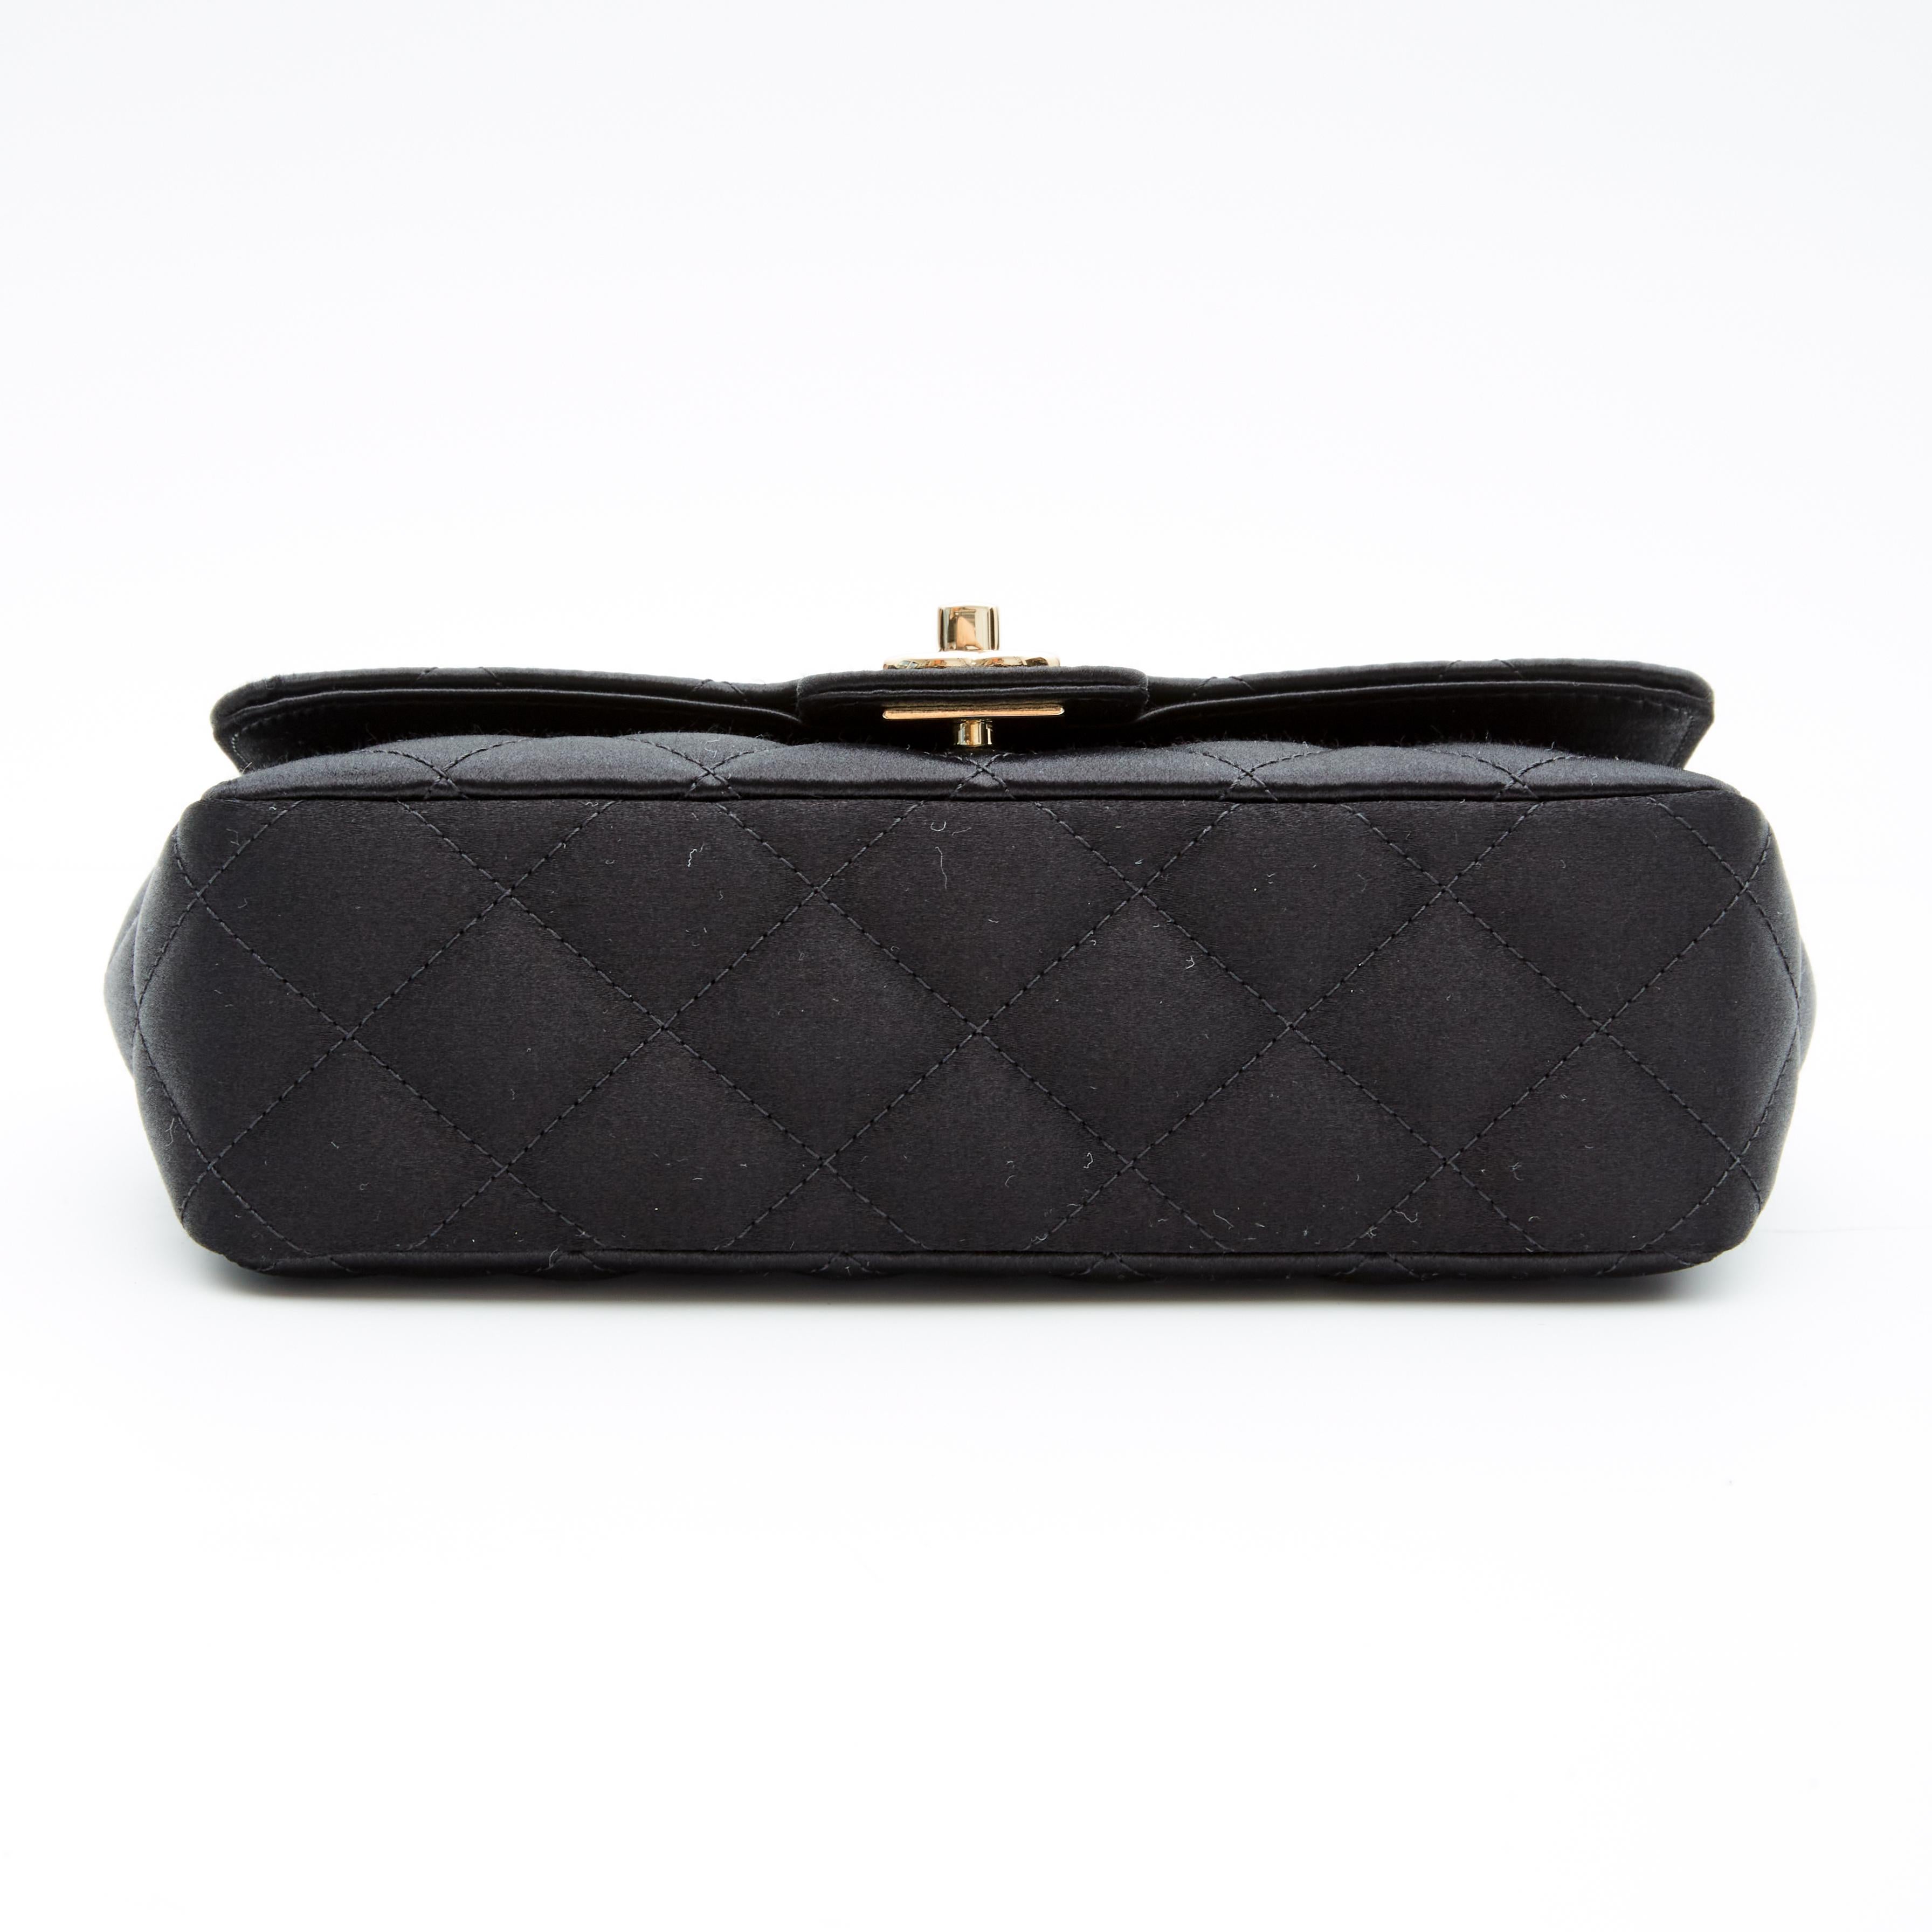 This Chanel Black Quilted Satin Camellia Mini Flap Bag is a rare and beautiful. The bag features diamond stitched quilted satin, gold-tone hardware, a front flap with the signature interlocking CC turn lock closure, and a gold-tone chain interlaced